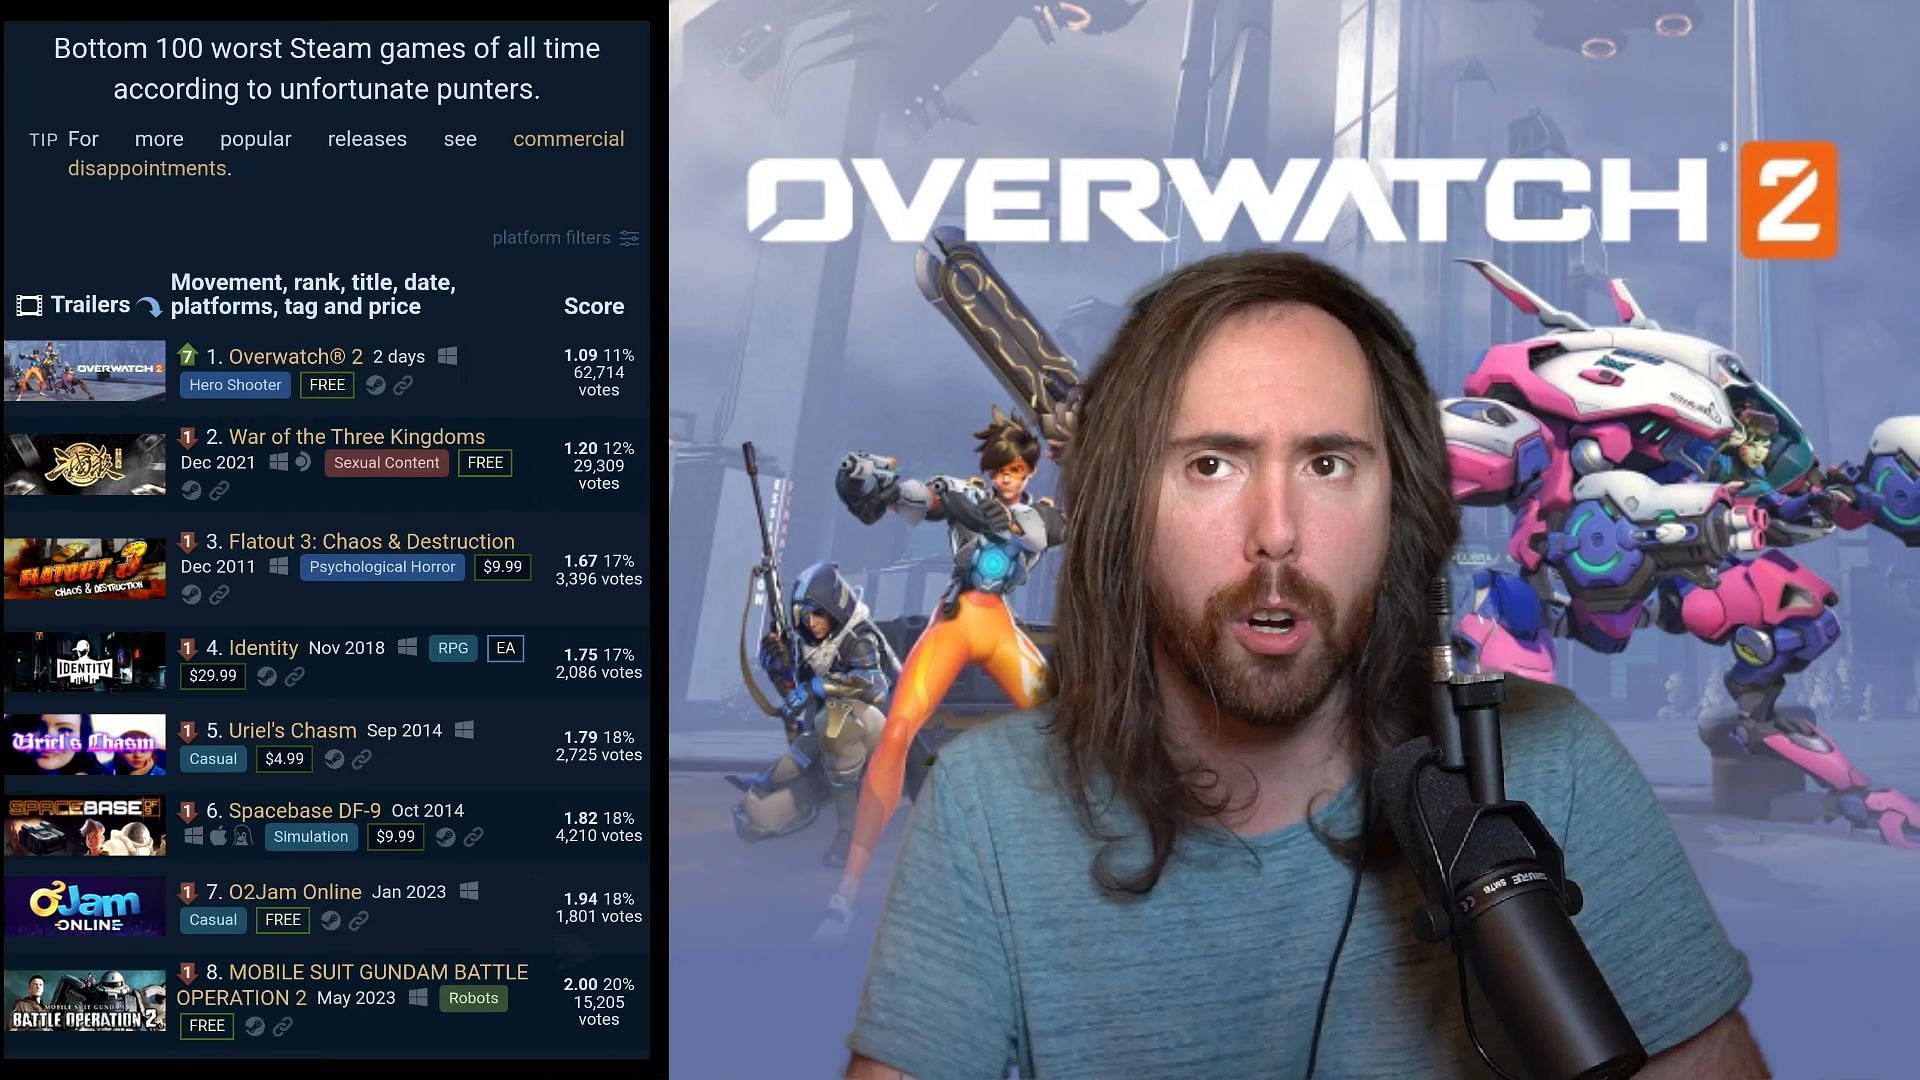 Asmongold Checks Overwatch 2 Playercount After Steam Launch 